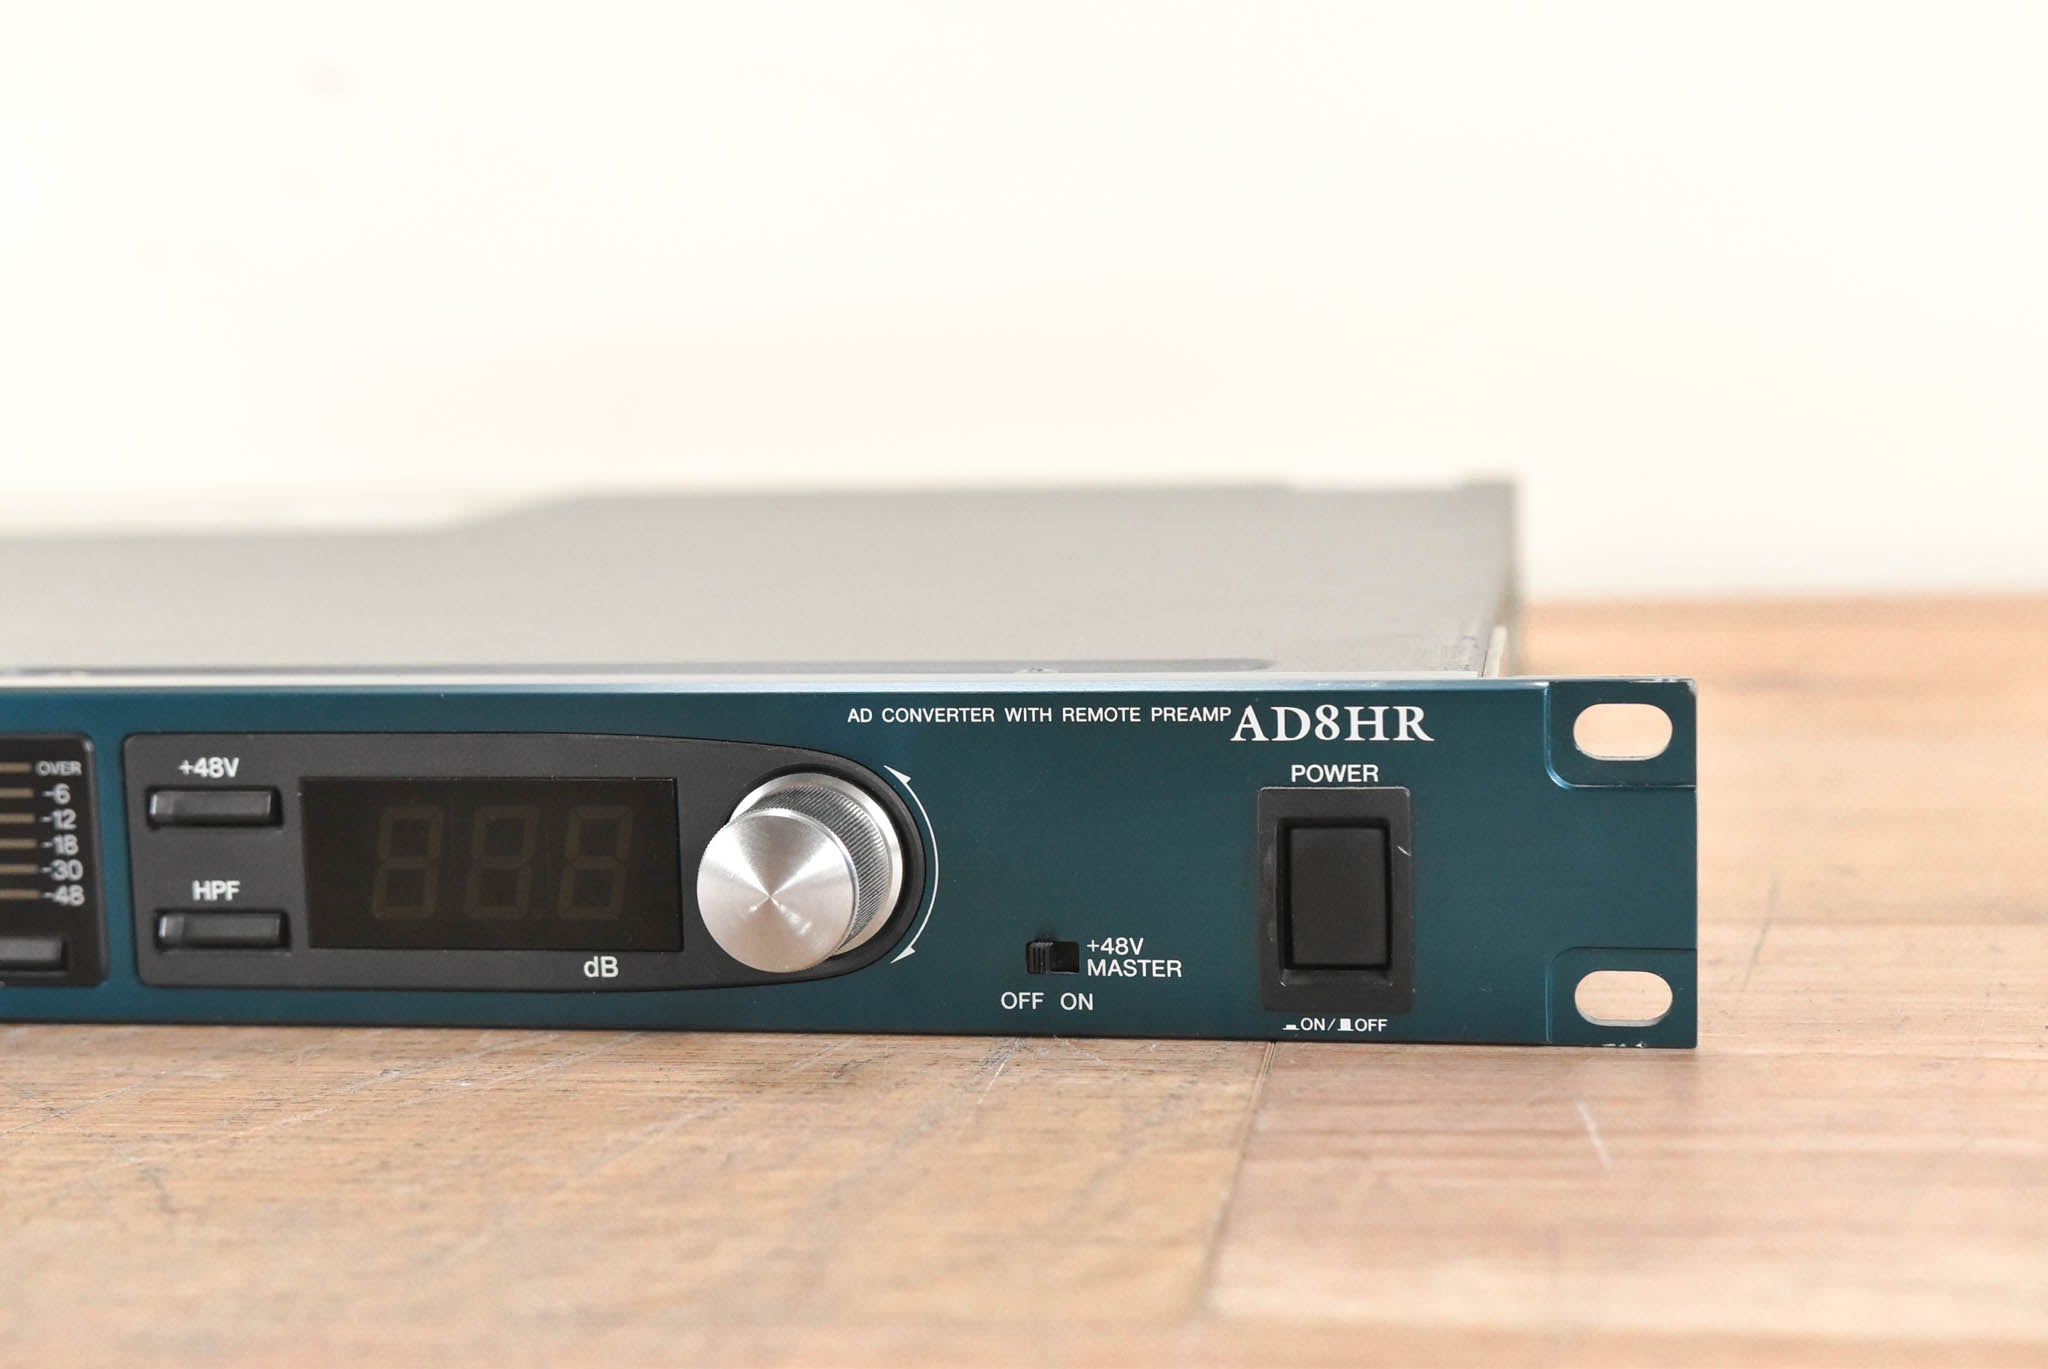 Yamaha AD8HR AD Converter with Remote Preamp